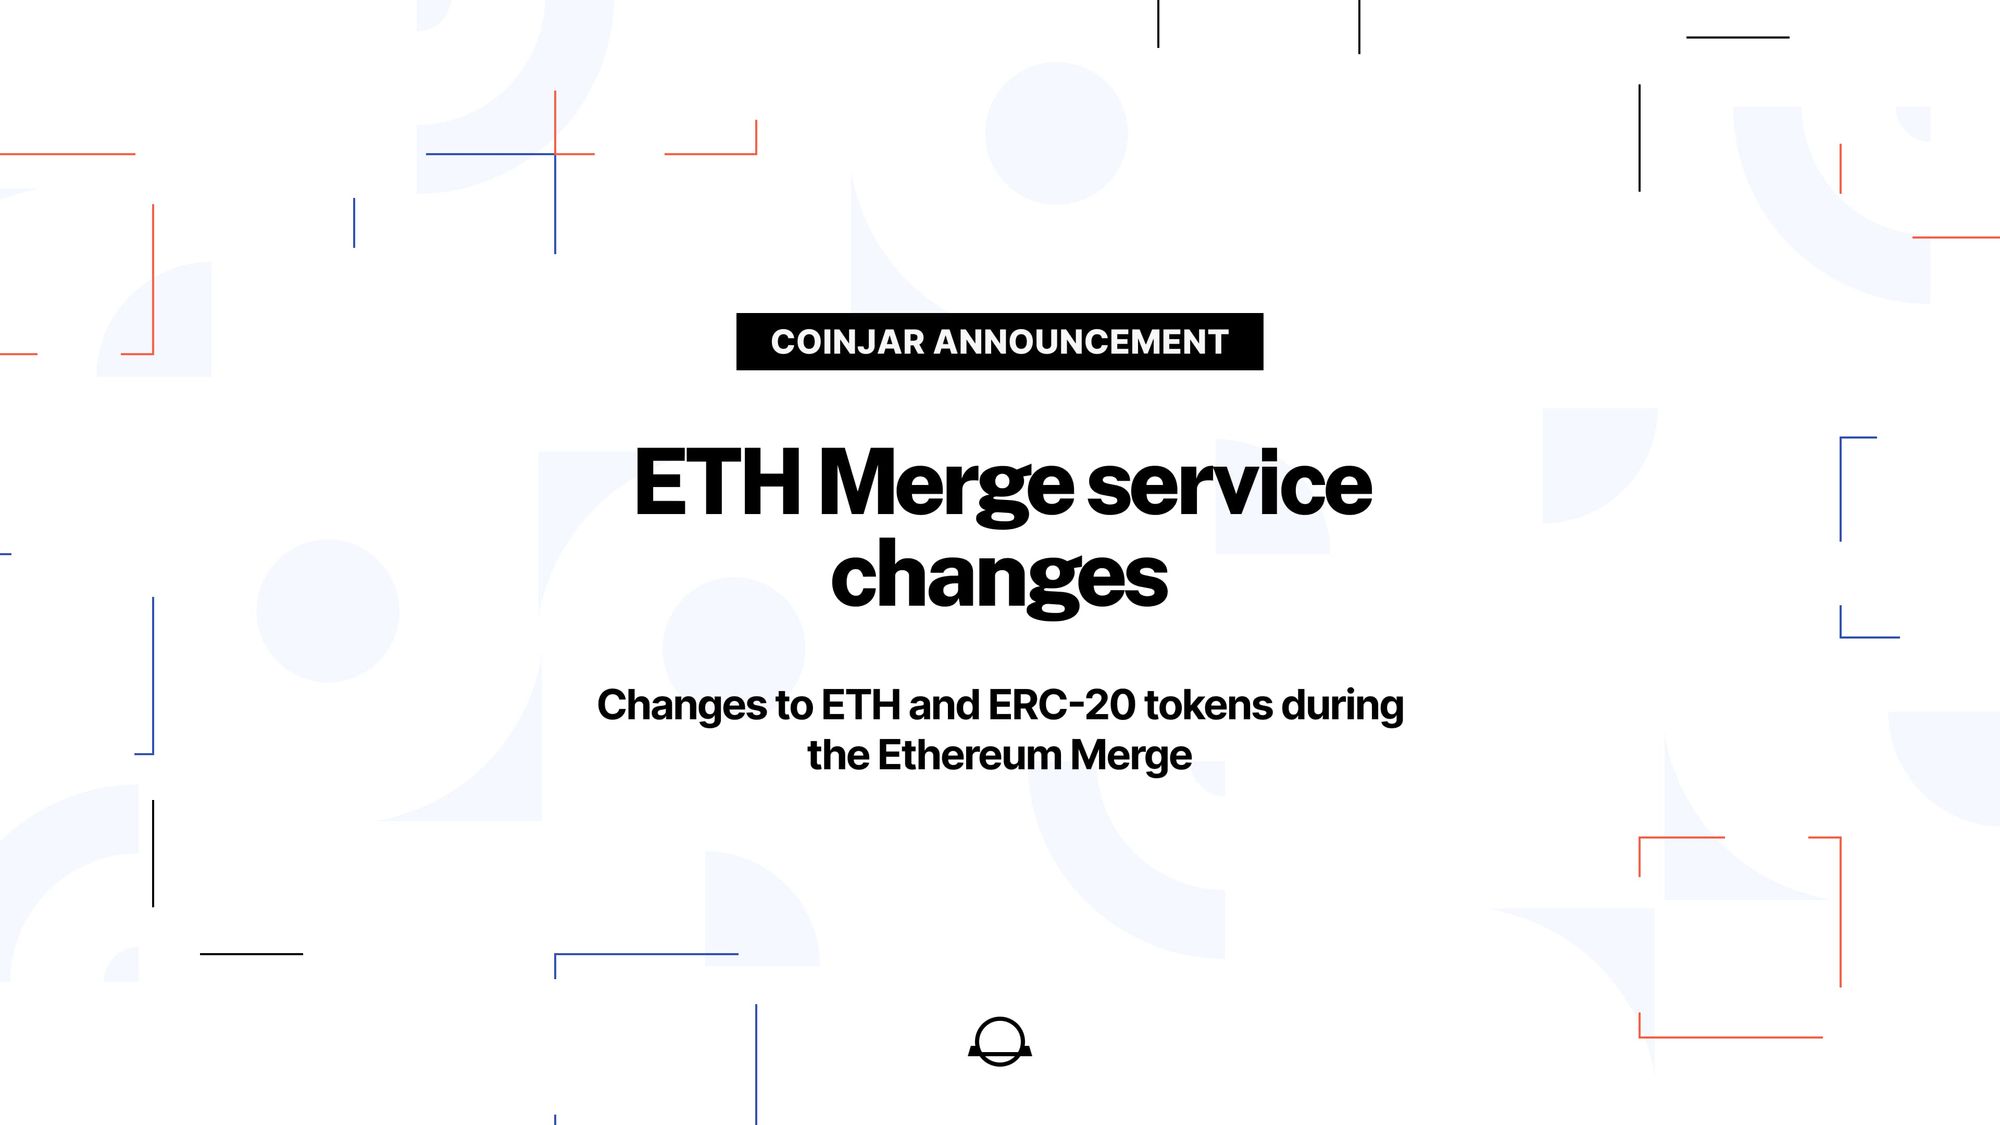 Changes to ETH and ERC-20 tokens during the Ethereum Merge